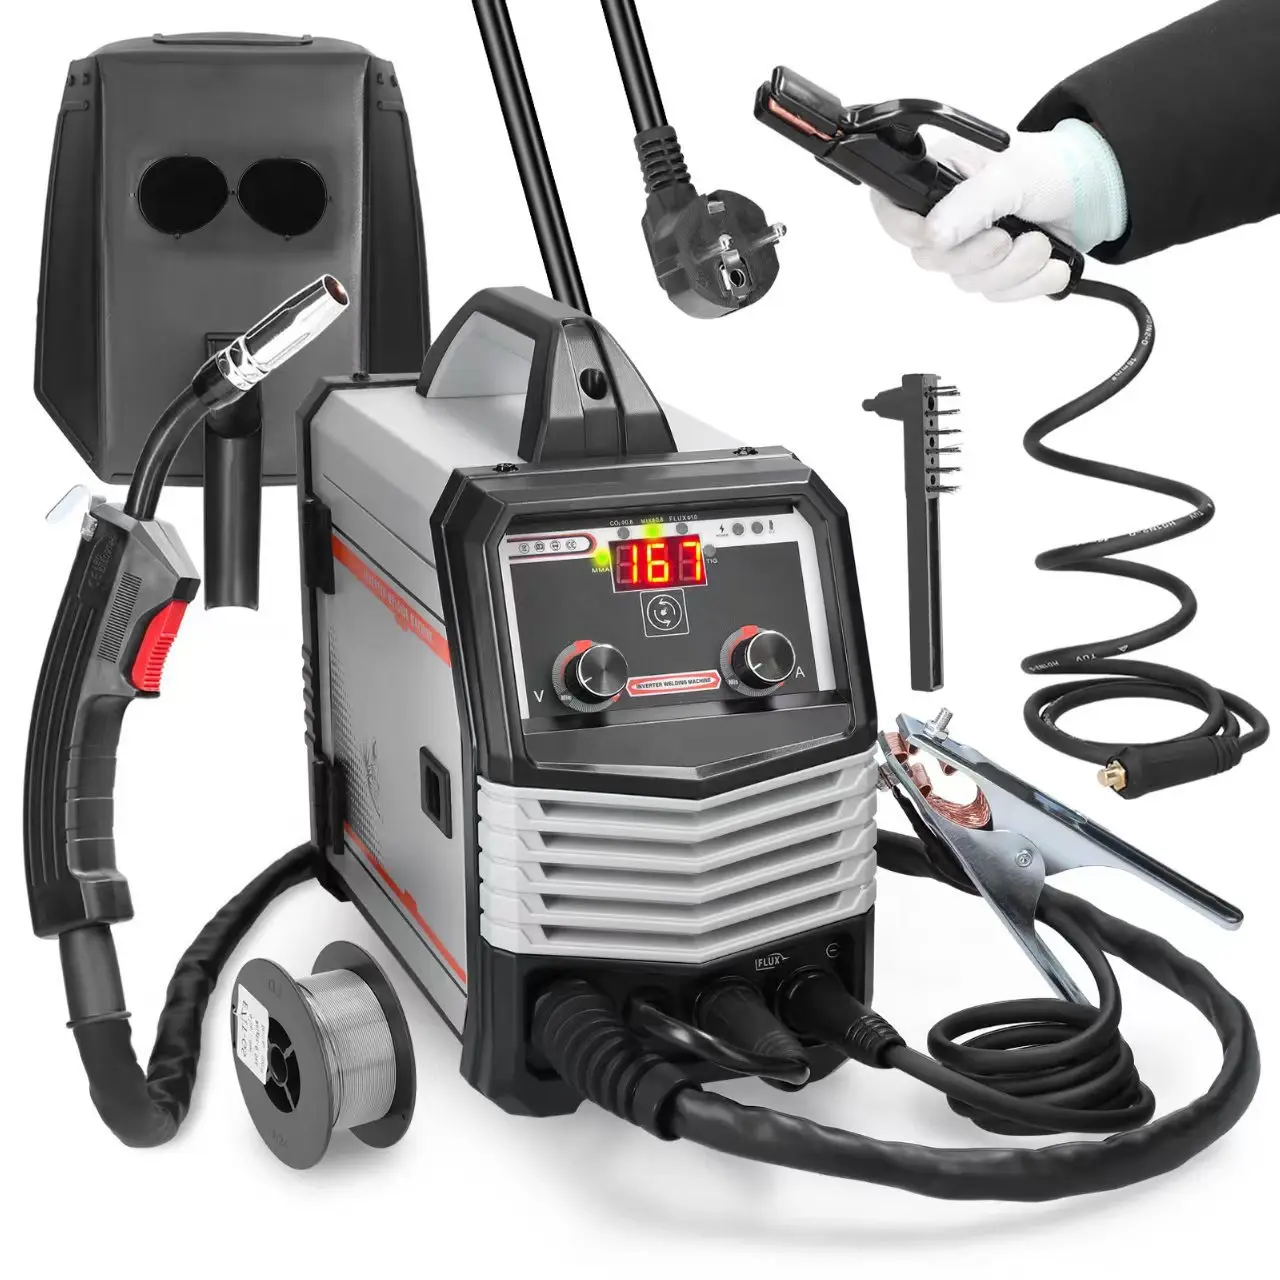 High Quality 120A 220V Voltage 1kg 4 in 1 Multifunctional Gas Shielded Welding Machine MIG/MAG/TIG/MMA Electric Welding